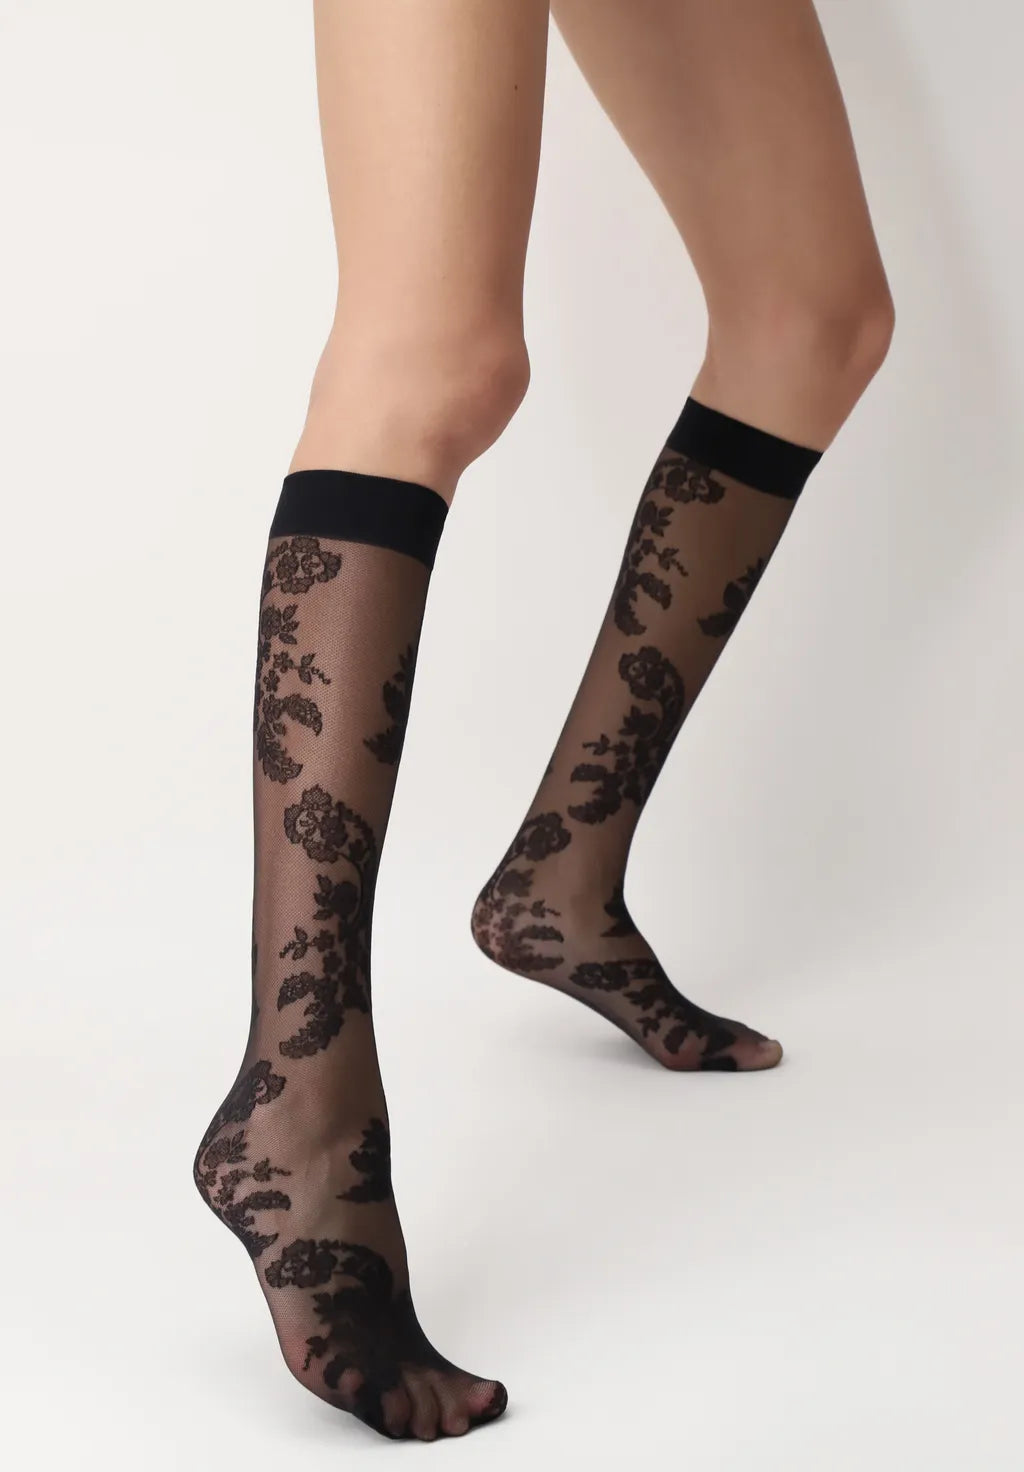 Oroblù Paisley Gambaletto - Sheer black fashion knee-high socks with a paisley lace style pattern and deep comfort cuff.